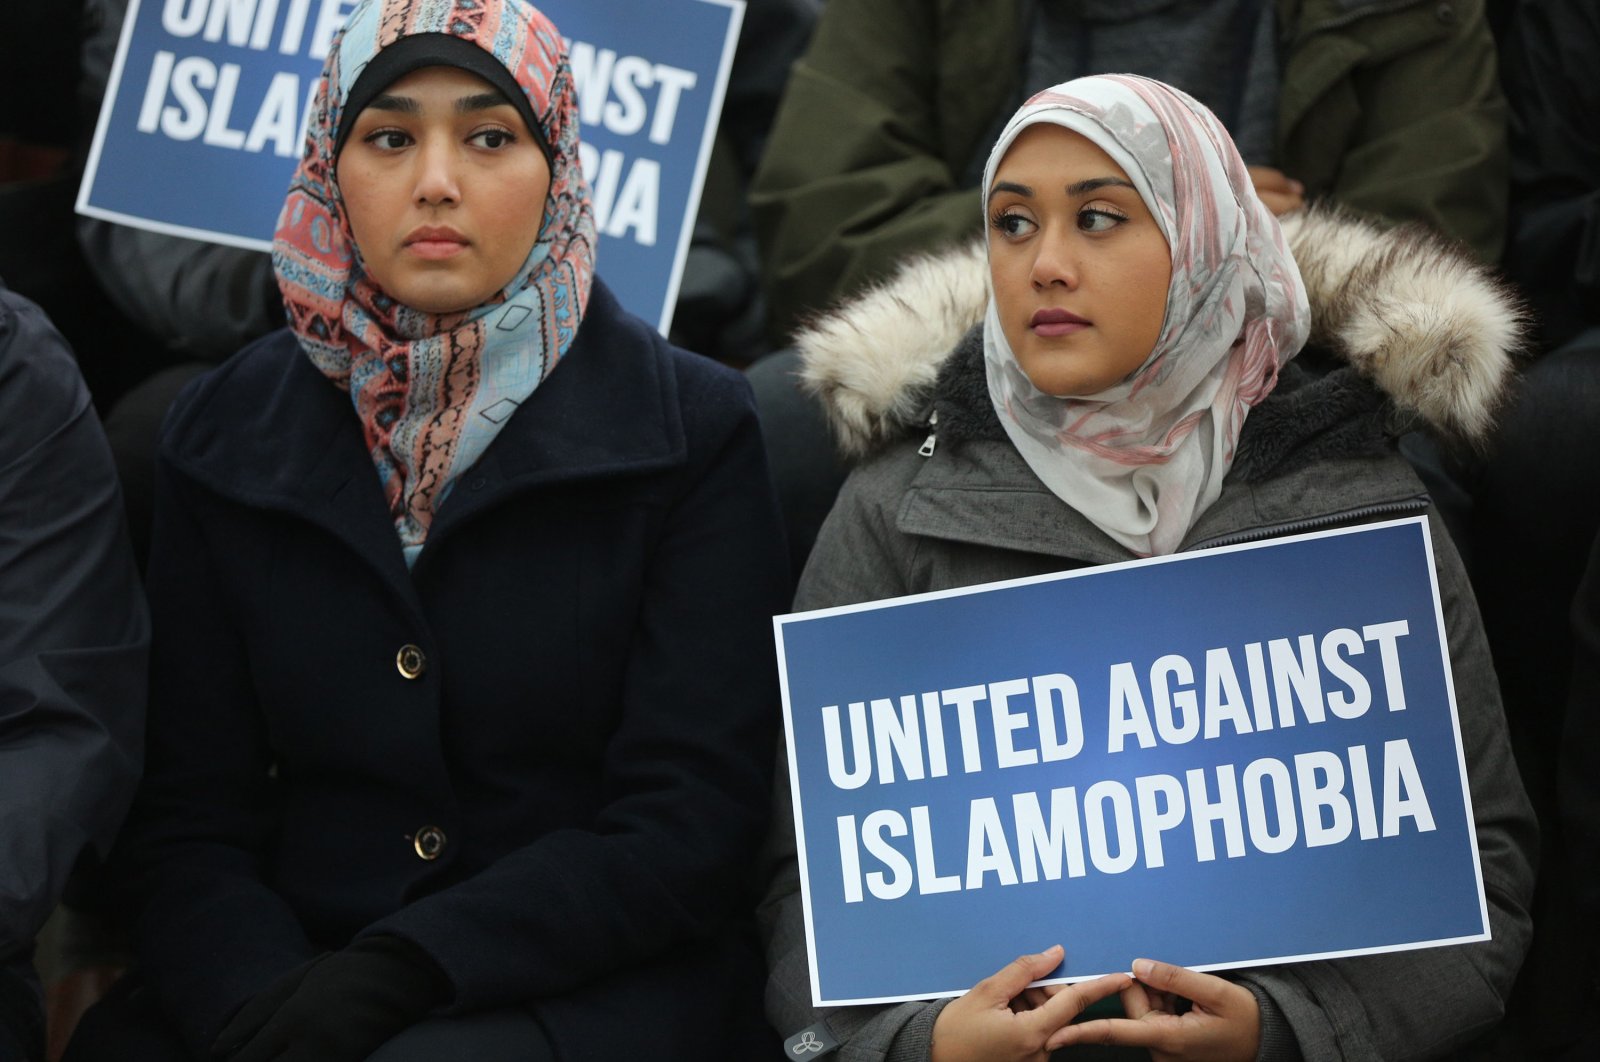 Muslim women take part in a vigil for the victims of New Zealand mosque shootings held at Nathan Philips Square in Toronto, Ontario, Canada, March 15, 2019. (Getty Images)